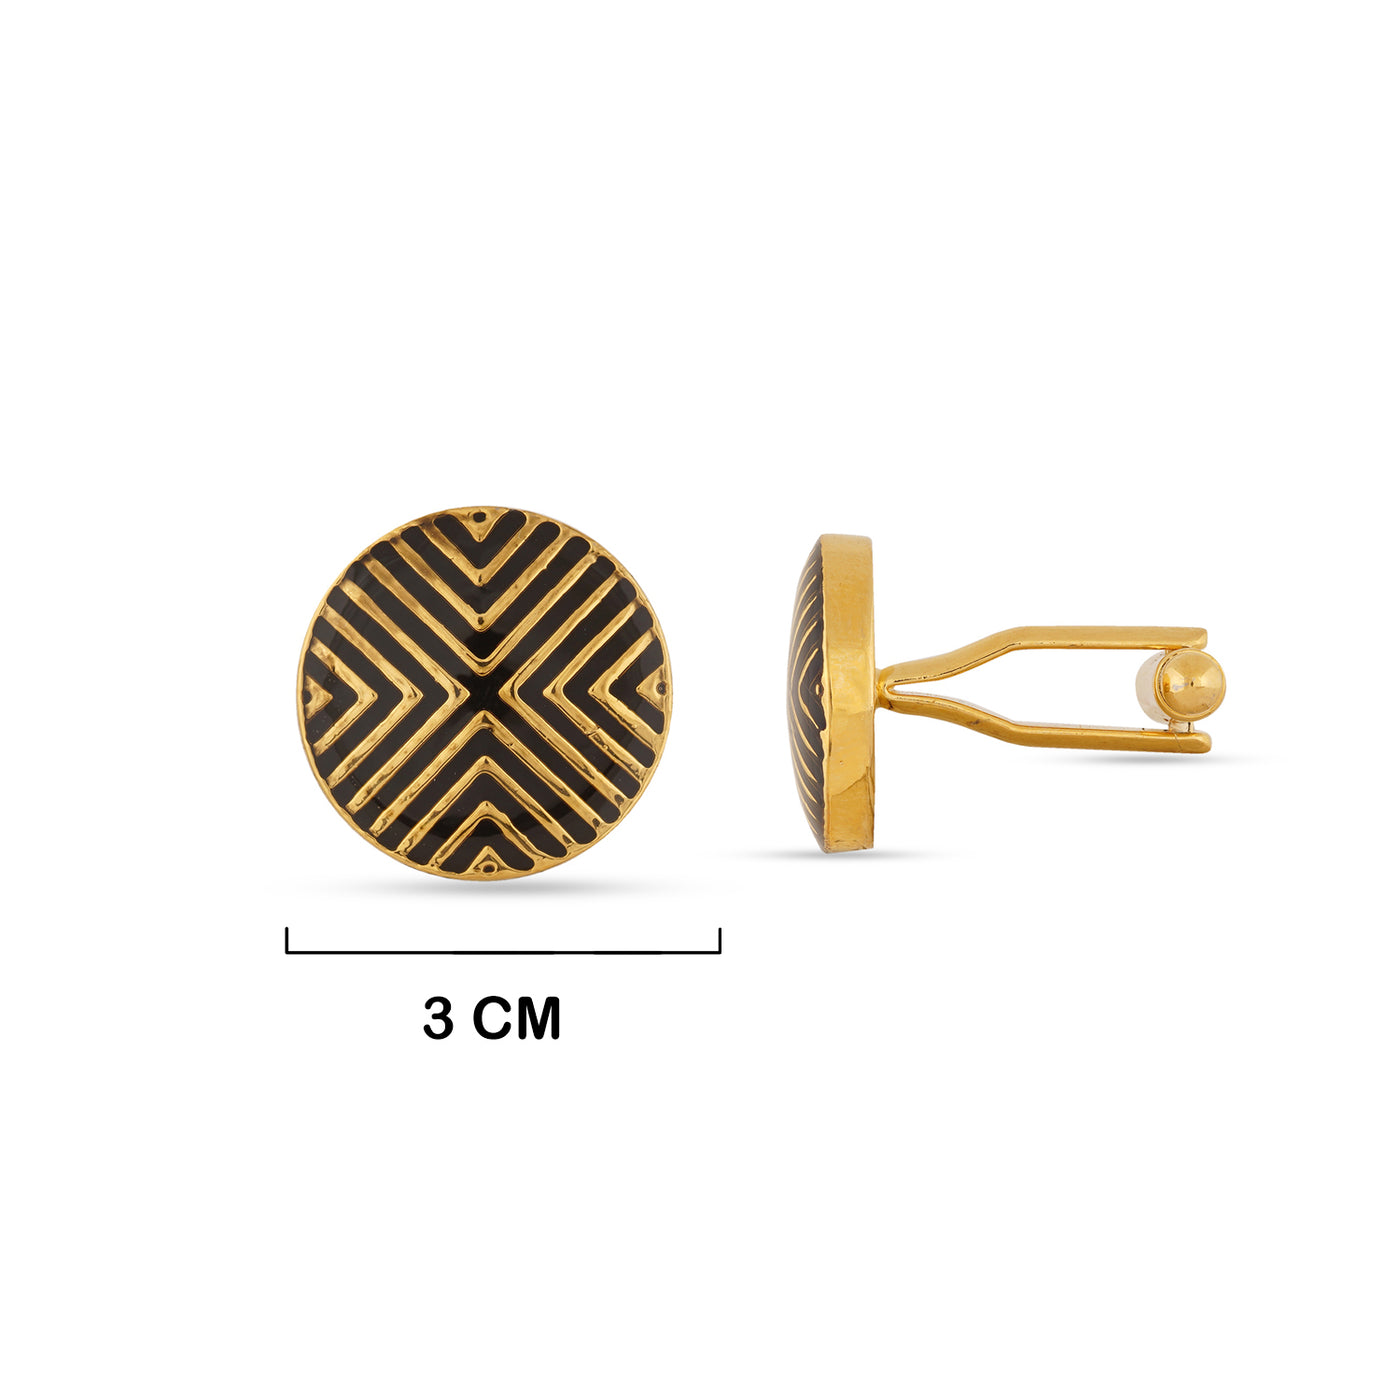 Black and Gold Cufflinks with measurements in cm. 3cm.